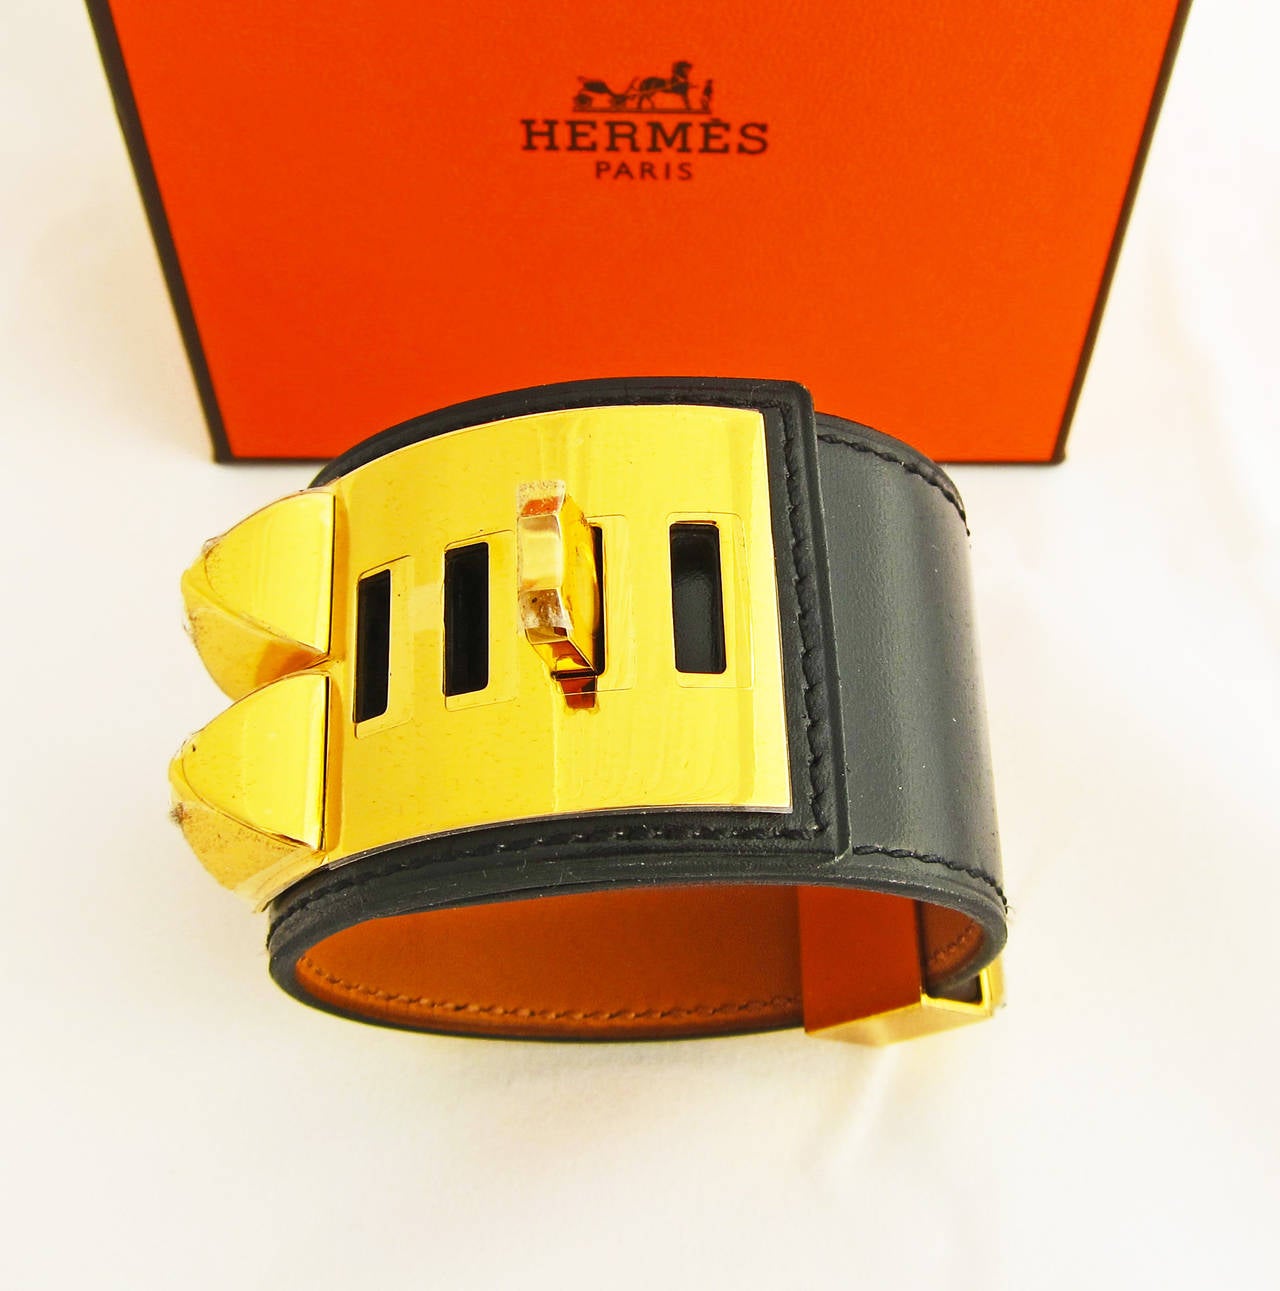 Hermes Black Box Leather Collier de Chien CDC Bracelet Gold GHW

Editors' Fave!
Brand new in box
Store fresh coming with Hermes box and ribbon  
Adjustable ladies' size S
Don't miss this gorgeous black CDC in BOX LEATHER !
So luxuriously